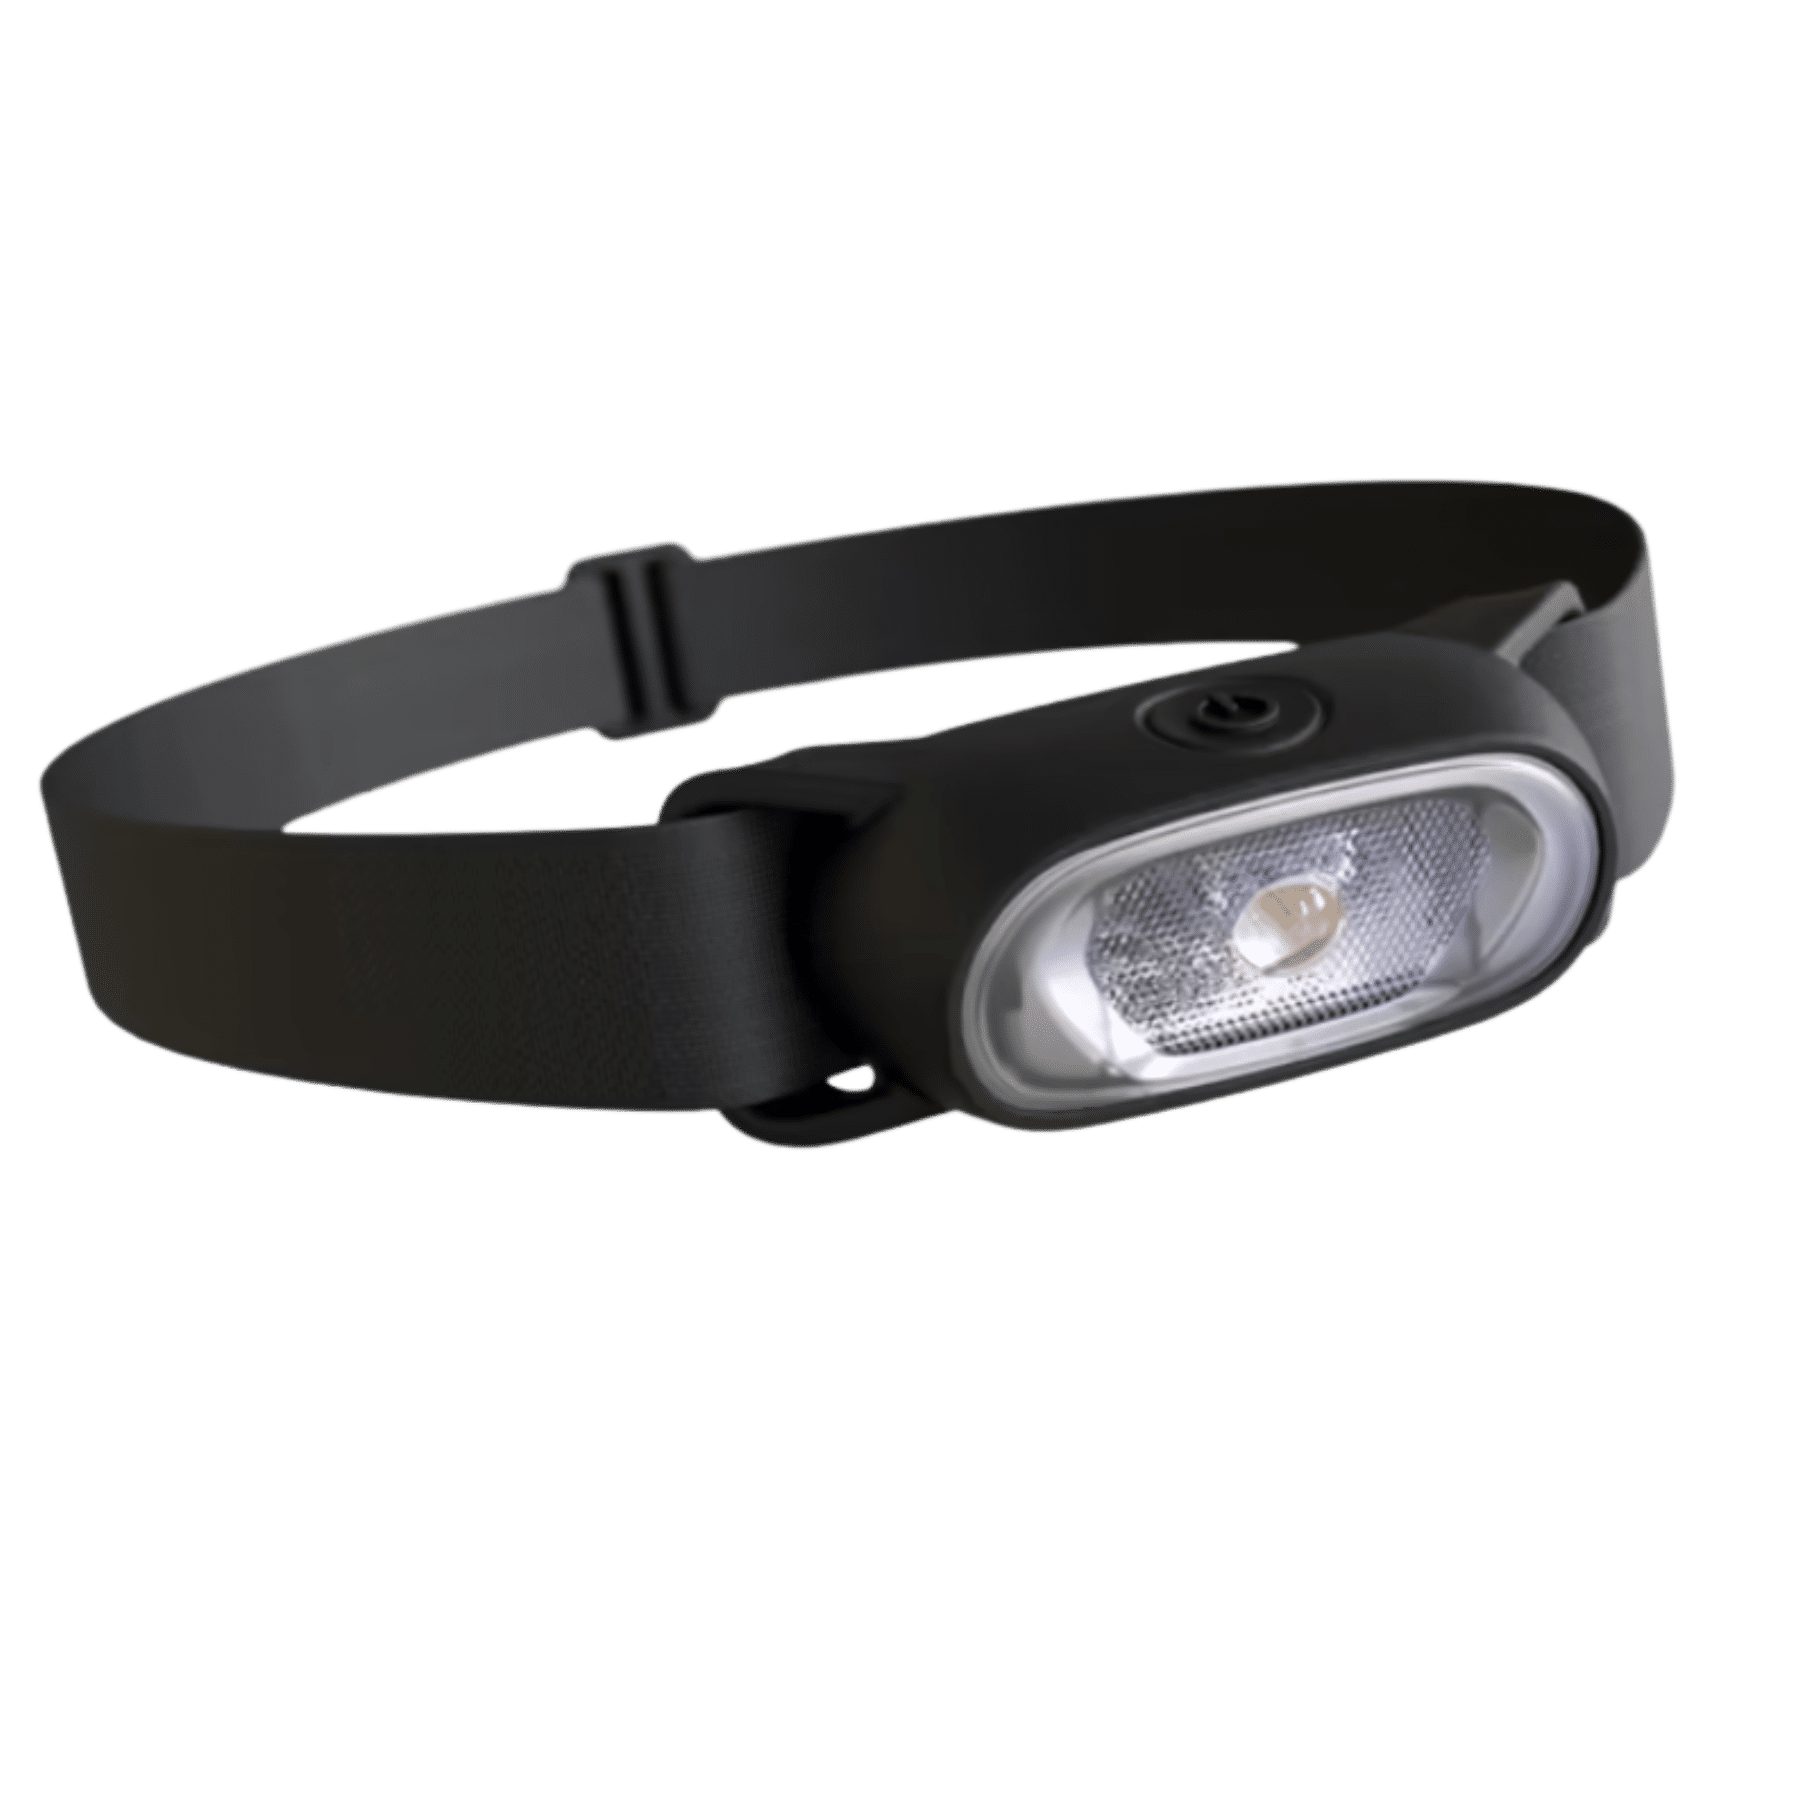 These are product images of Headtorch on rent by SharePal in Bangalore.